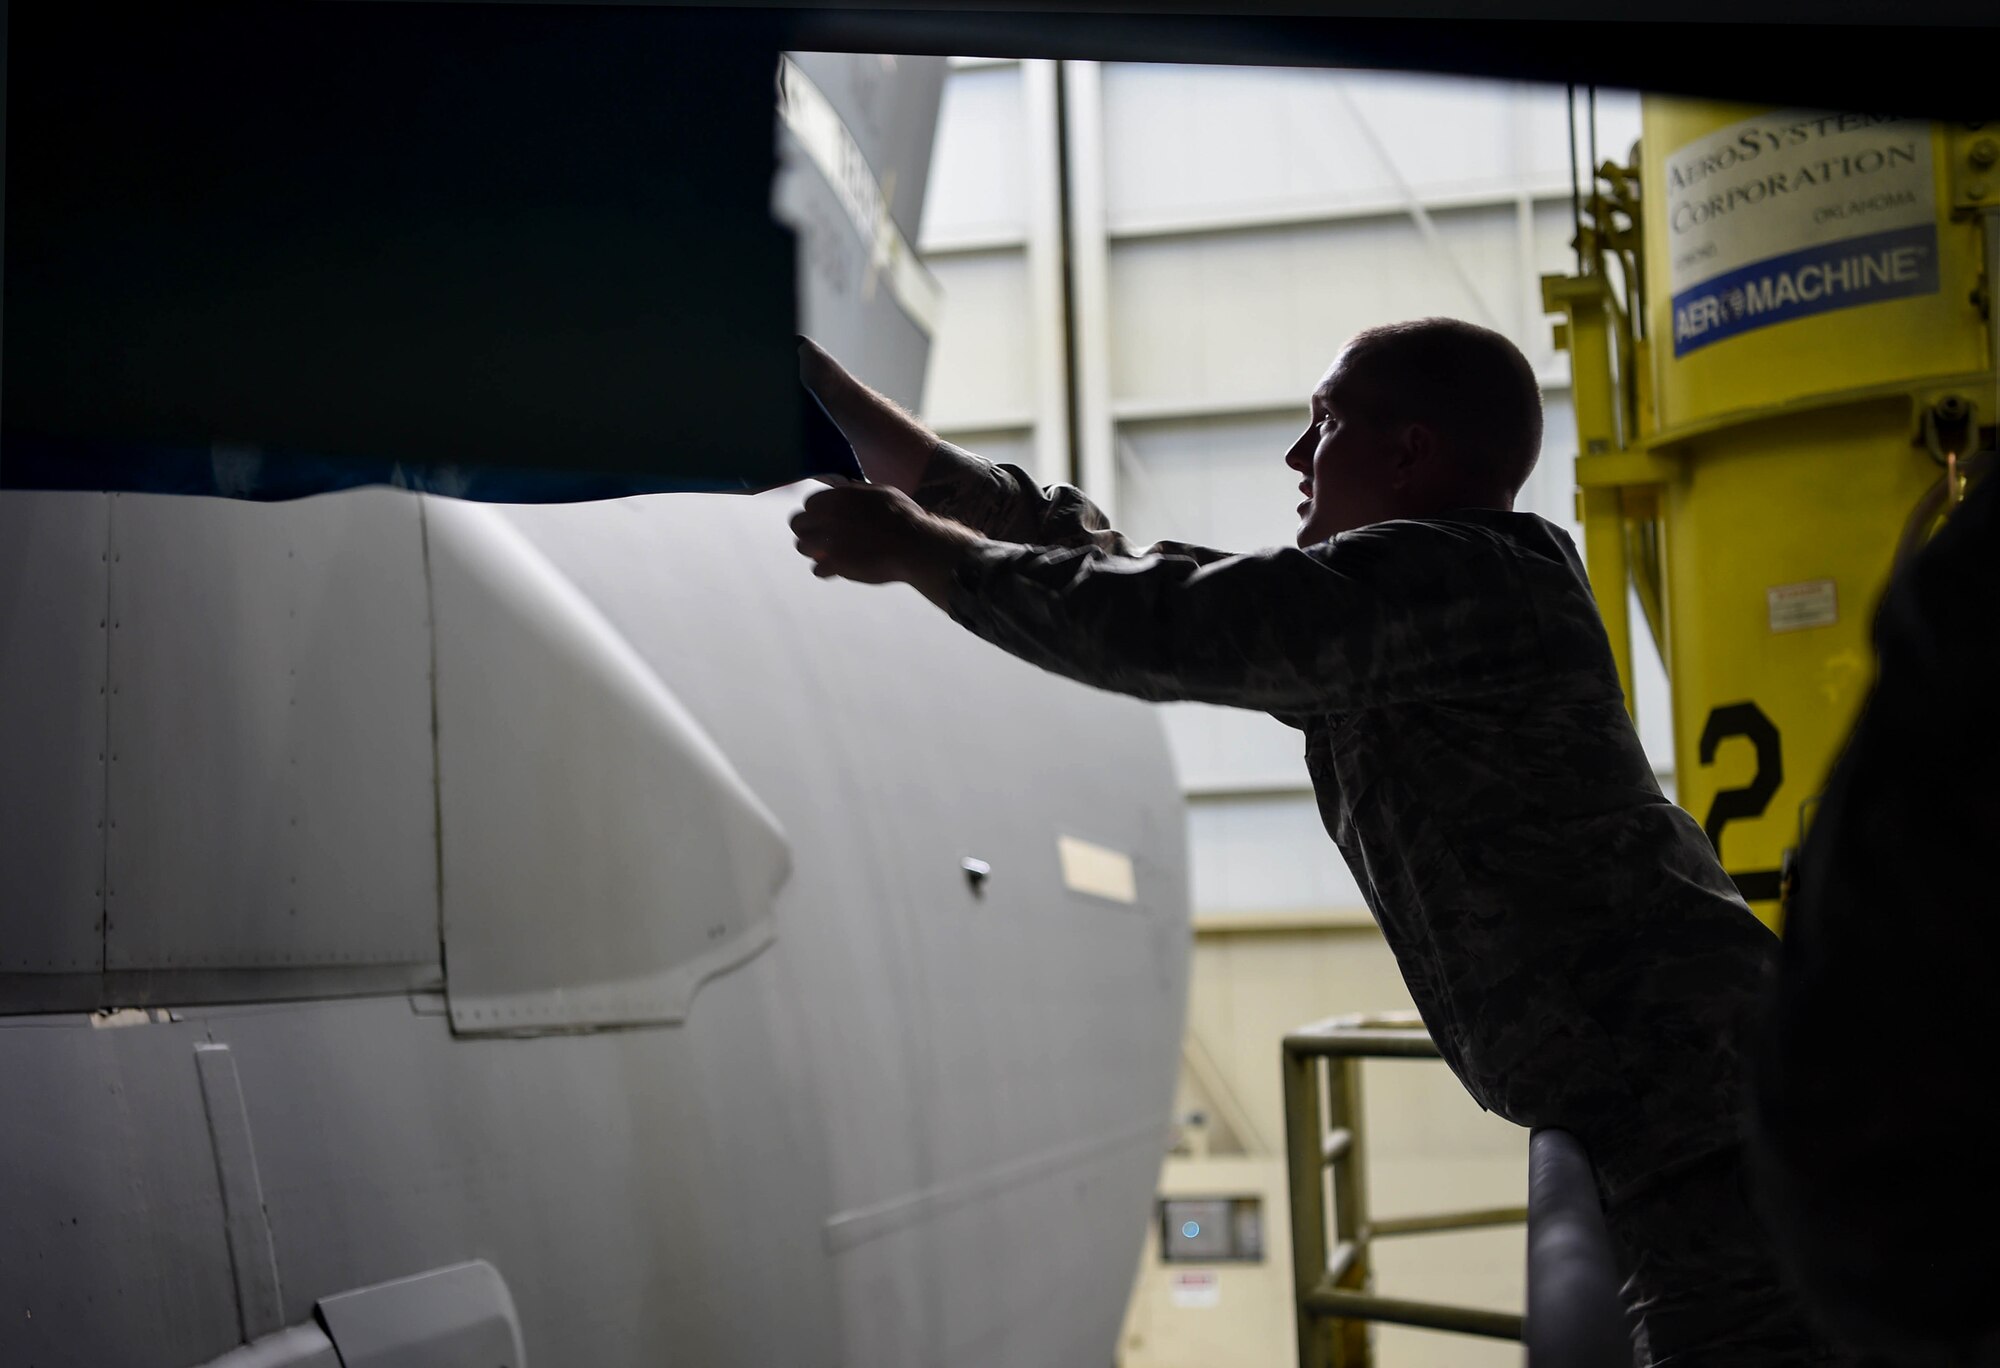 Staff Sgt. Cody Lange, 60th Maintenance Squadron aircraft structural maintenance technician, removes plastic covering a section of a C-17 Globemaster III from Travis Air Force Base, Calif., which was placed there to protect it while the C-17 was painted Aug. 6, 2018, at Joint Base Lewis-McChord, Wash. California laws prevent Travis Airmen from spray painting their C-17s, so they brought it to McChord where it is allowed. (U.S. Air Force photo by Senior Airman Tryphena Mayhugh)